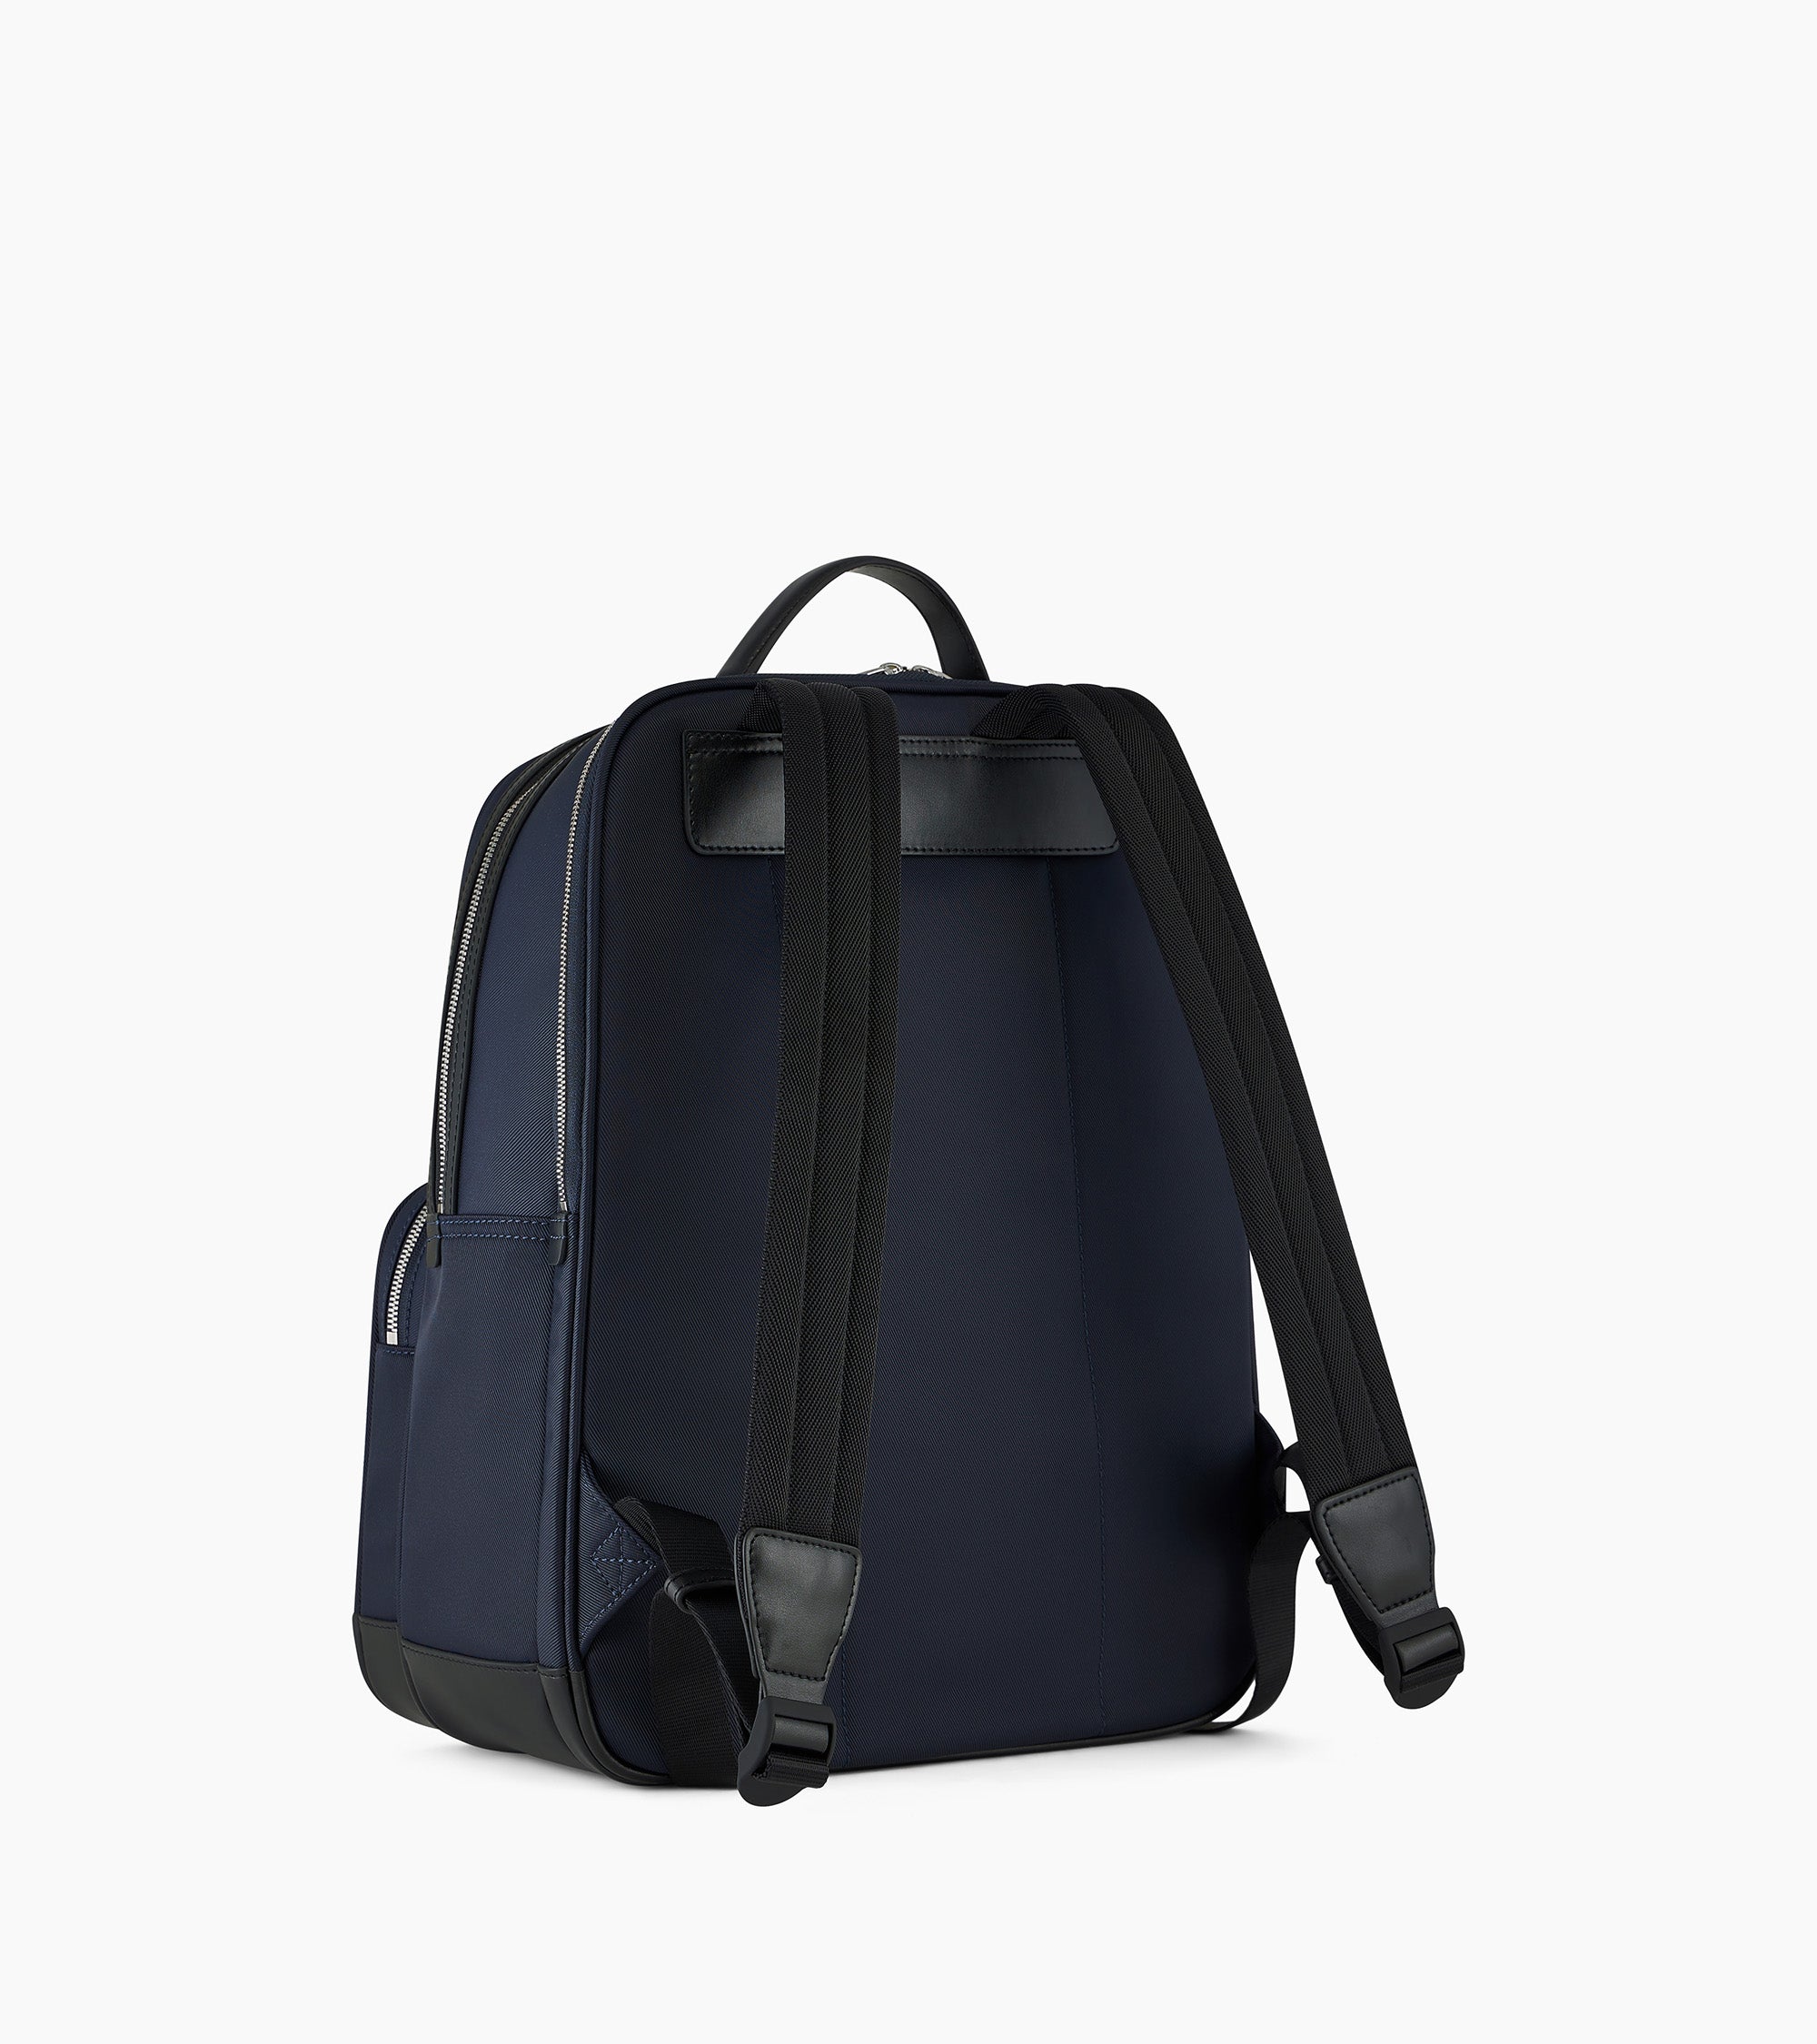 Gaspard large, zipped backpack